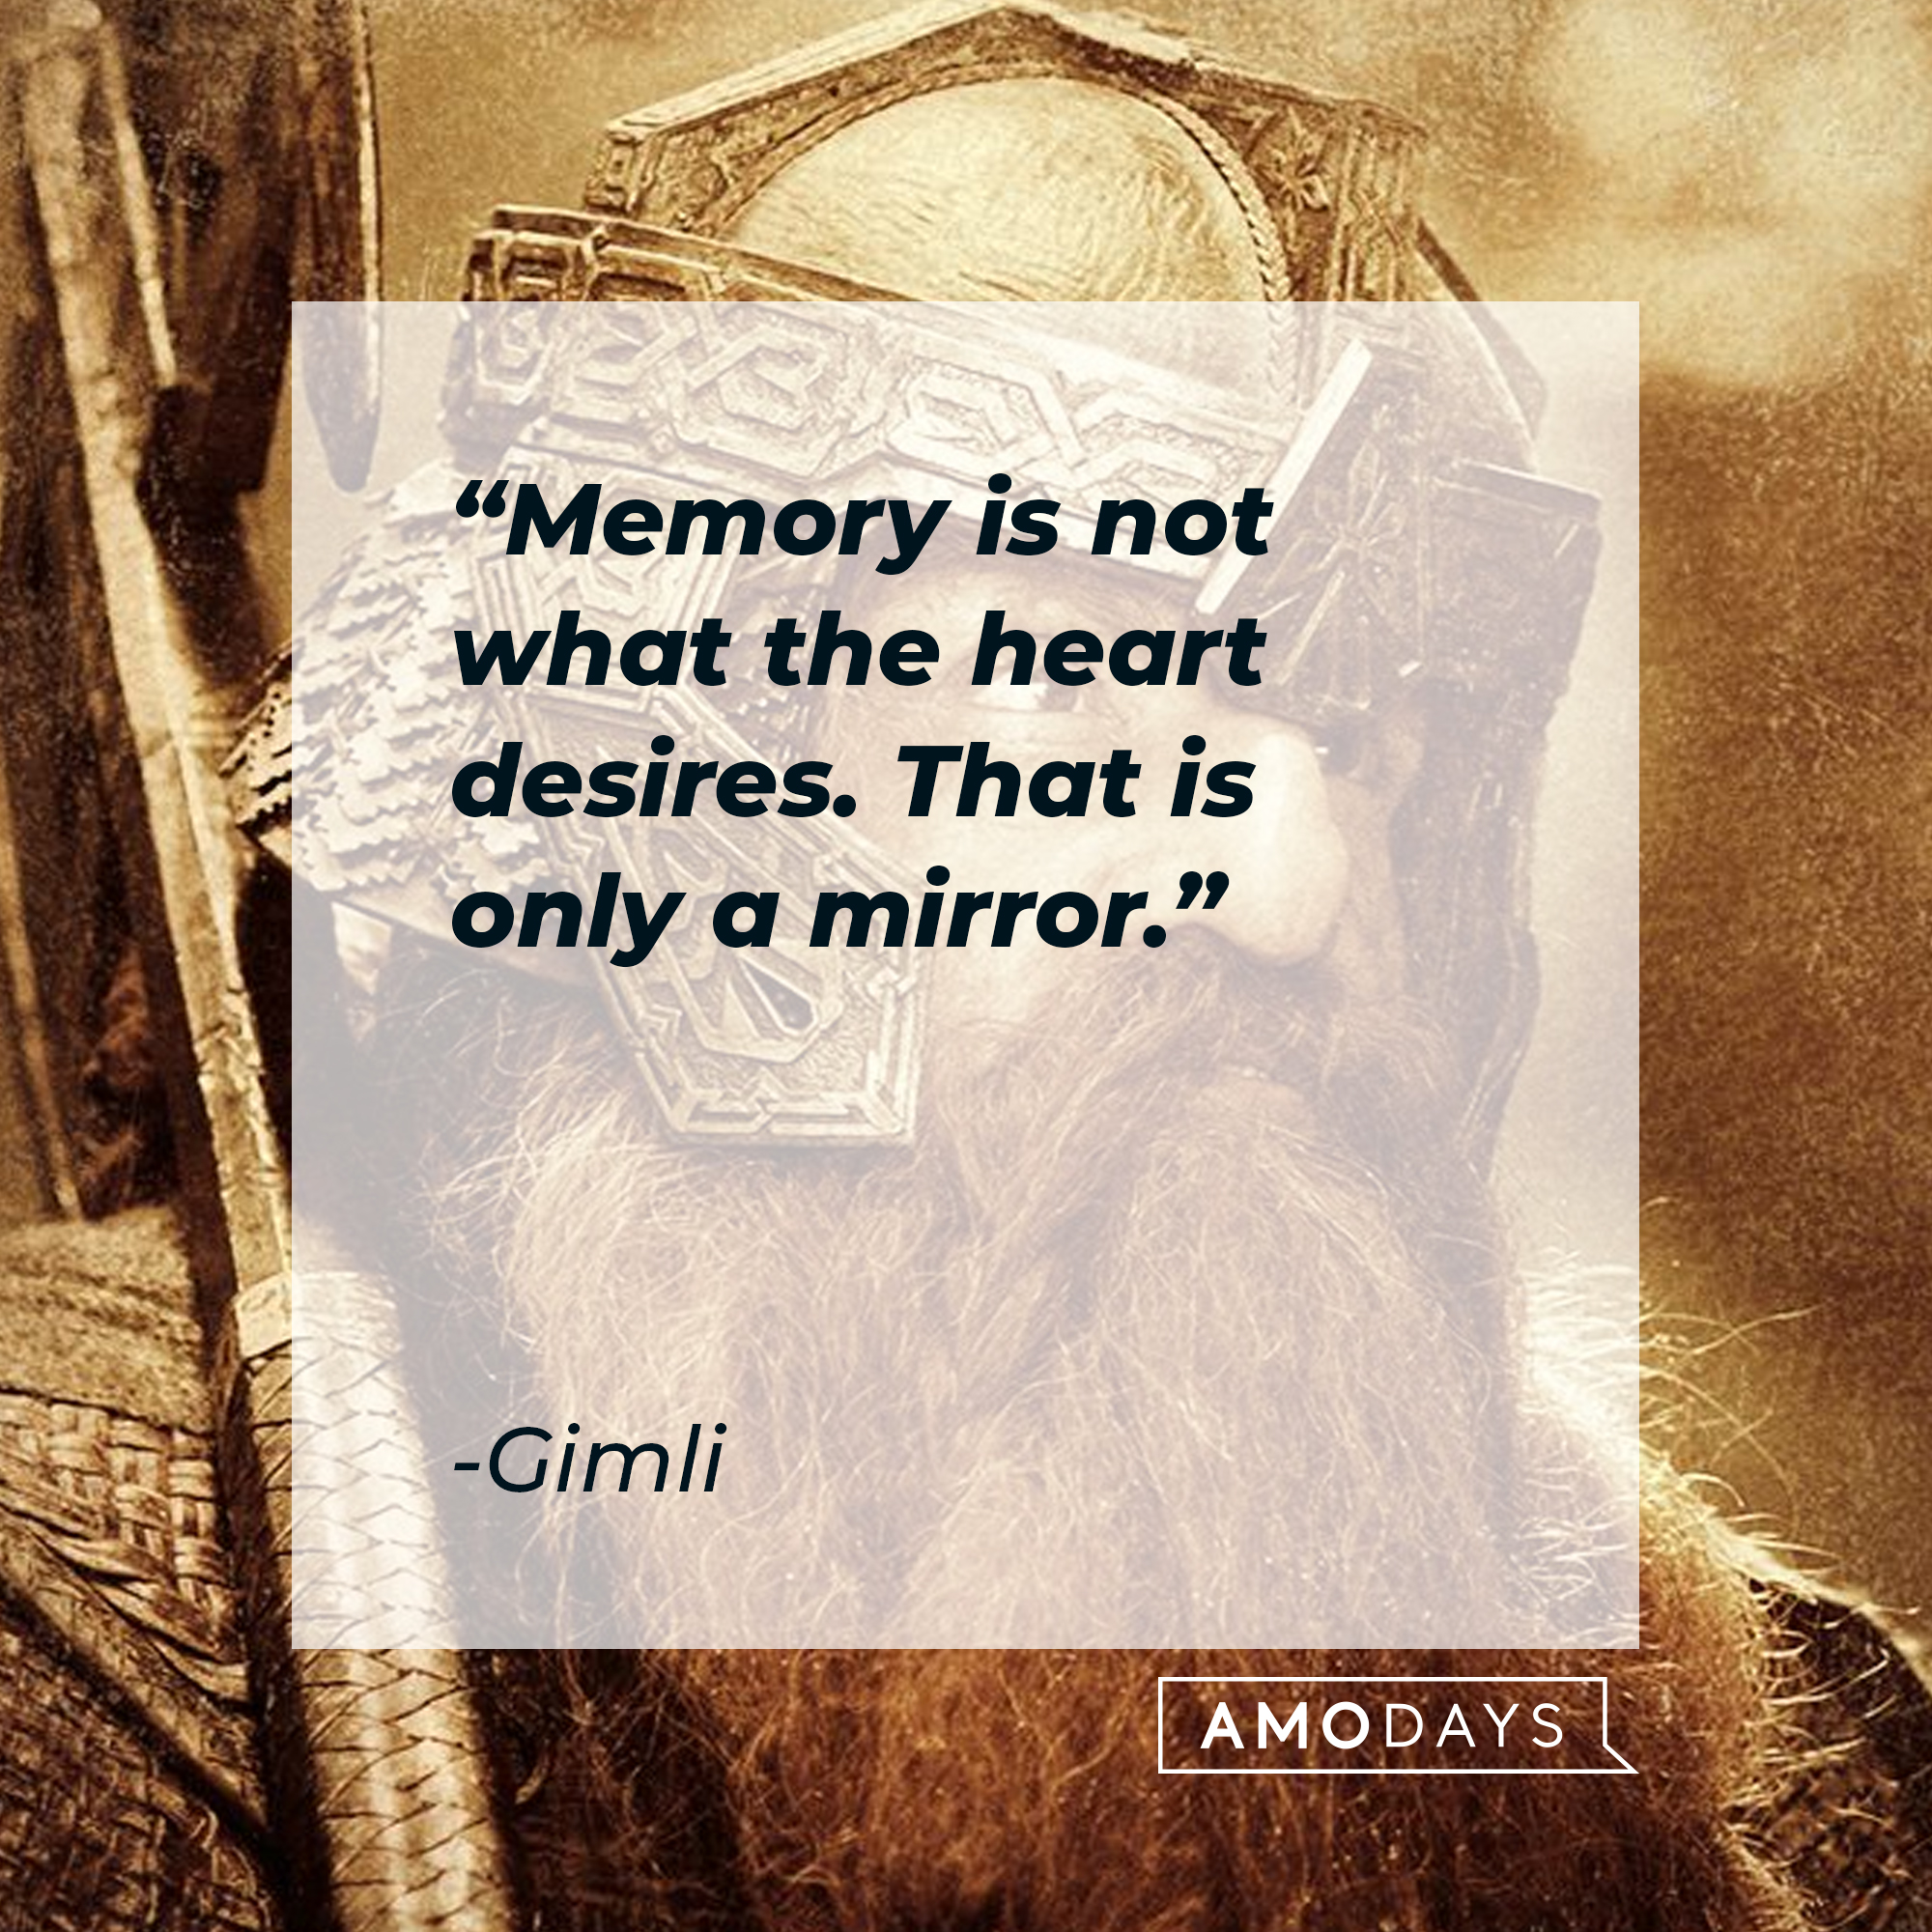 Gimli and his quote from "Lord of the Rings:" "Memory is not what the heart desires. That is only a mirror." | Source: Facebook/lordoftheringstrilogy